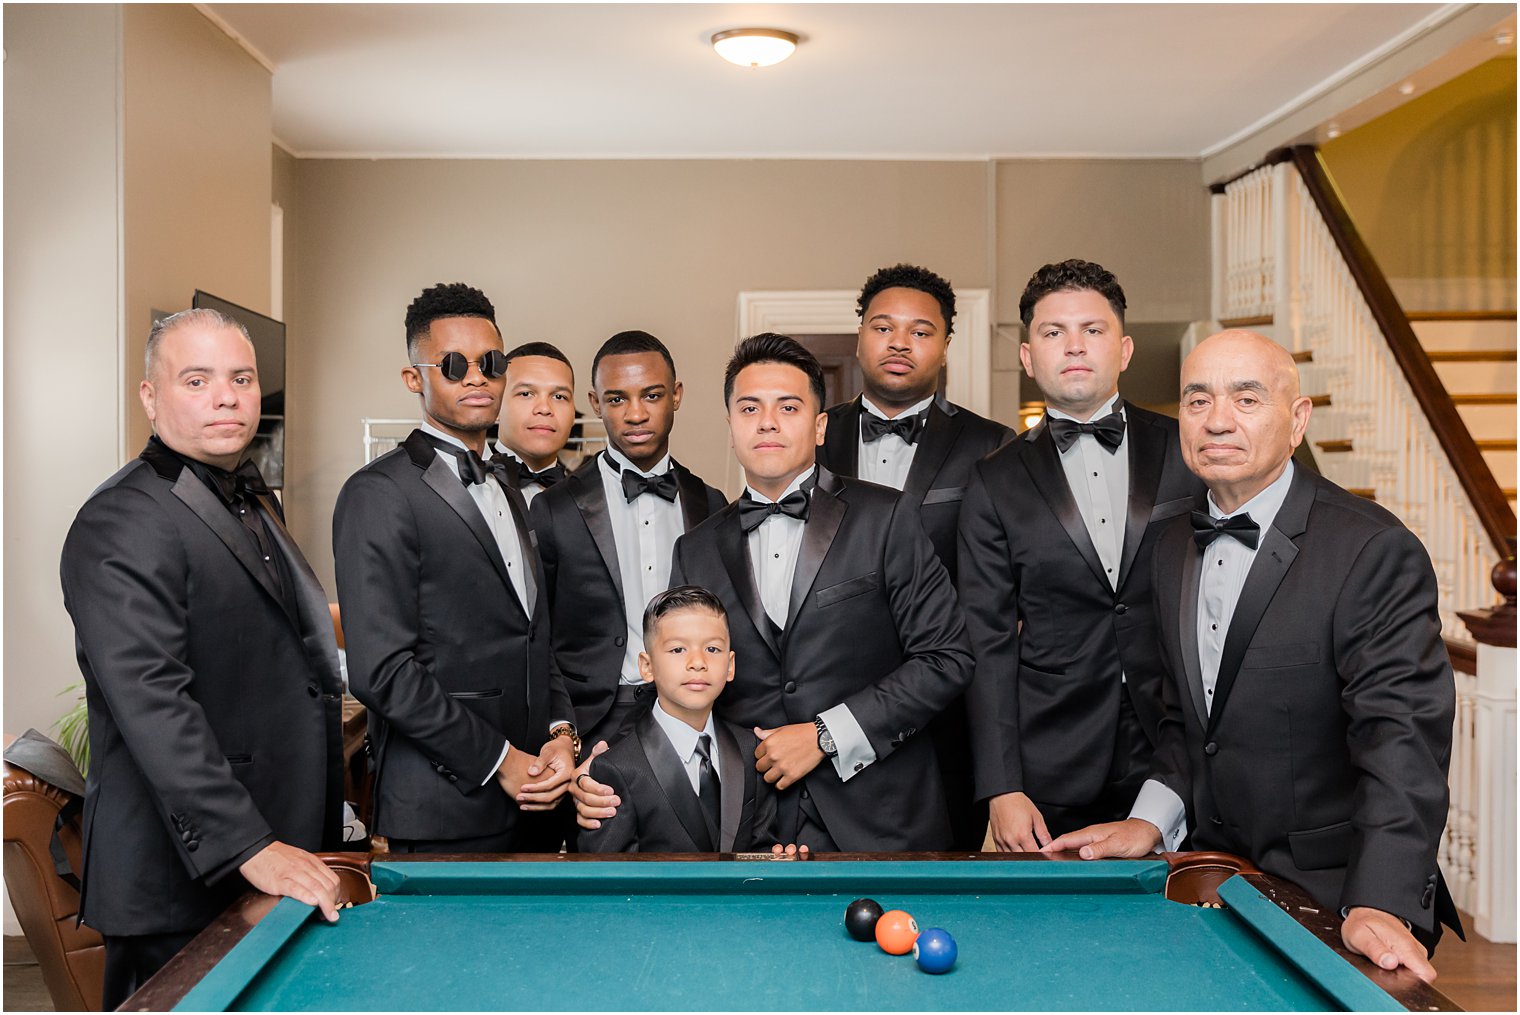 groomsmen pose by pool table at Collingswood Grand Ballroom